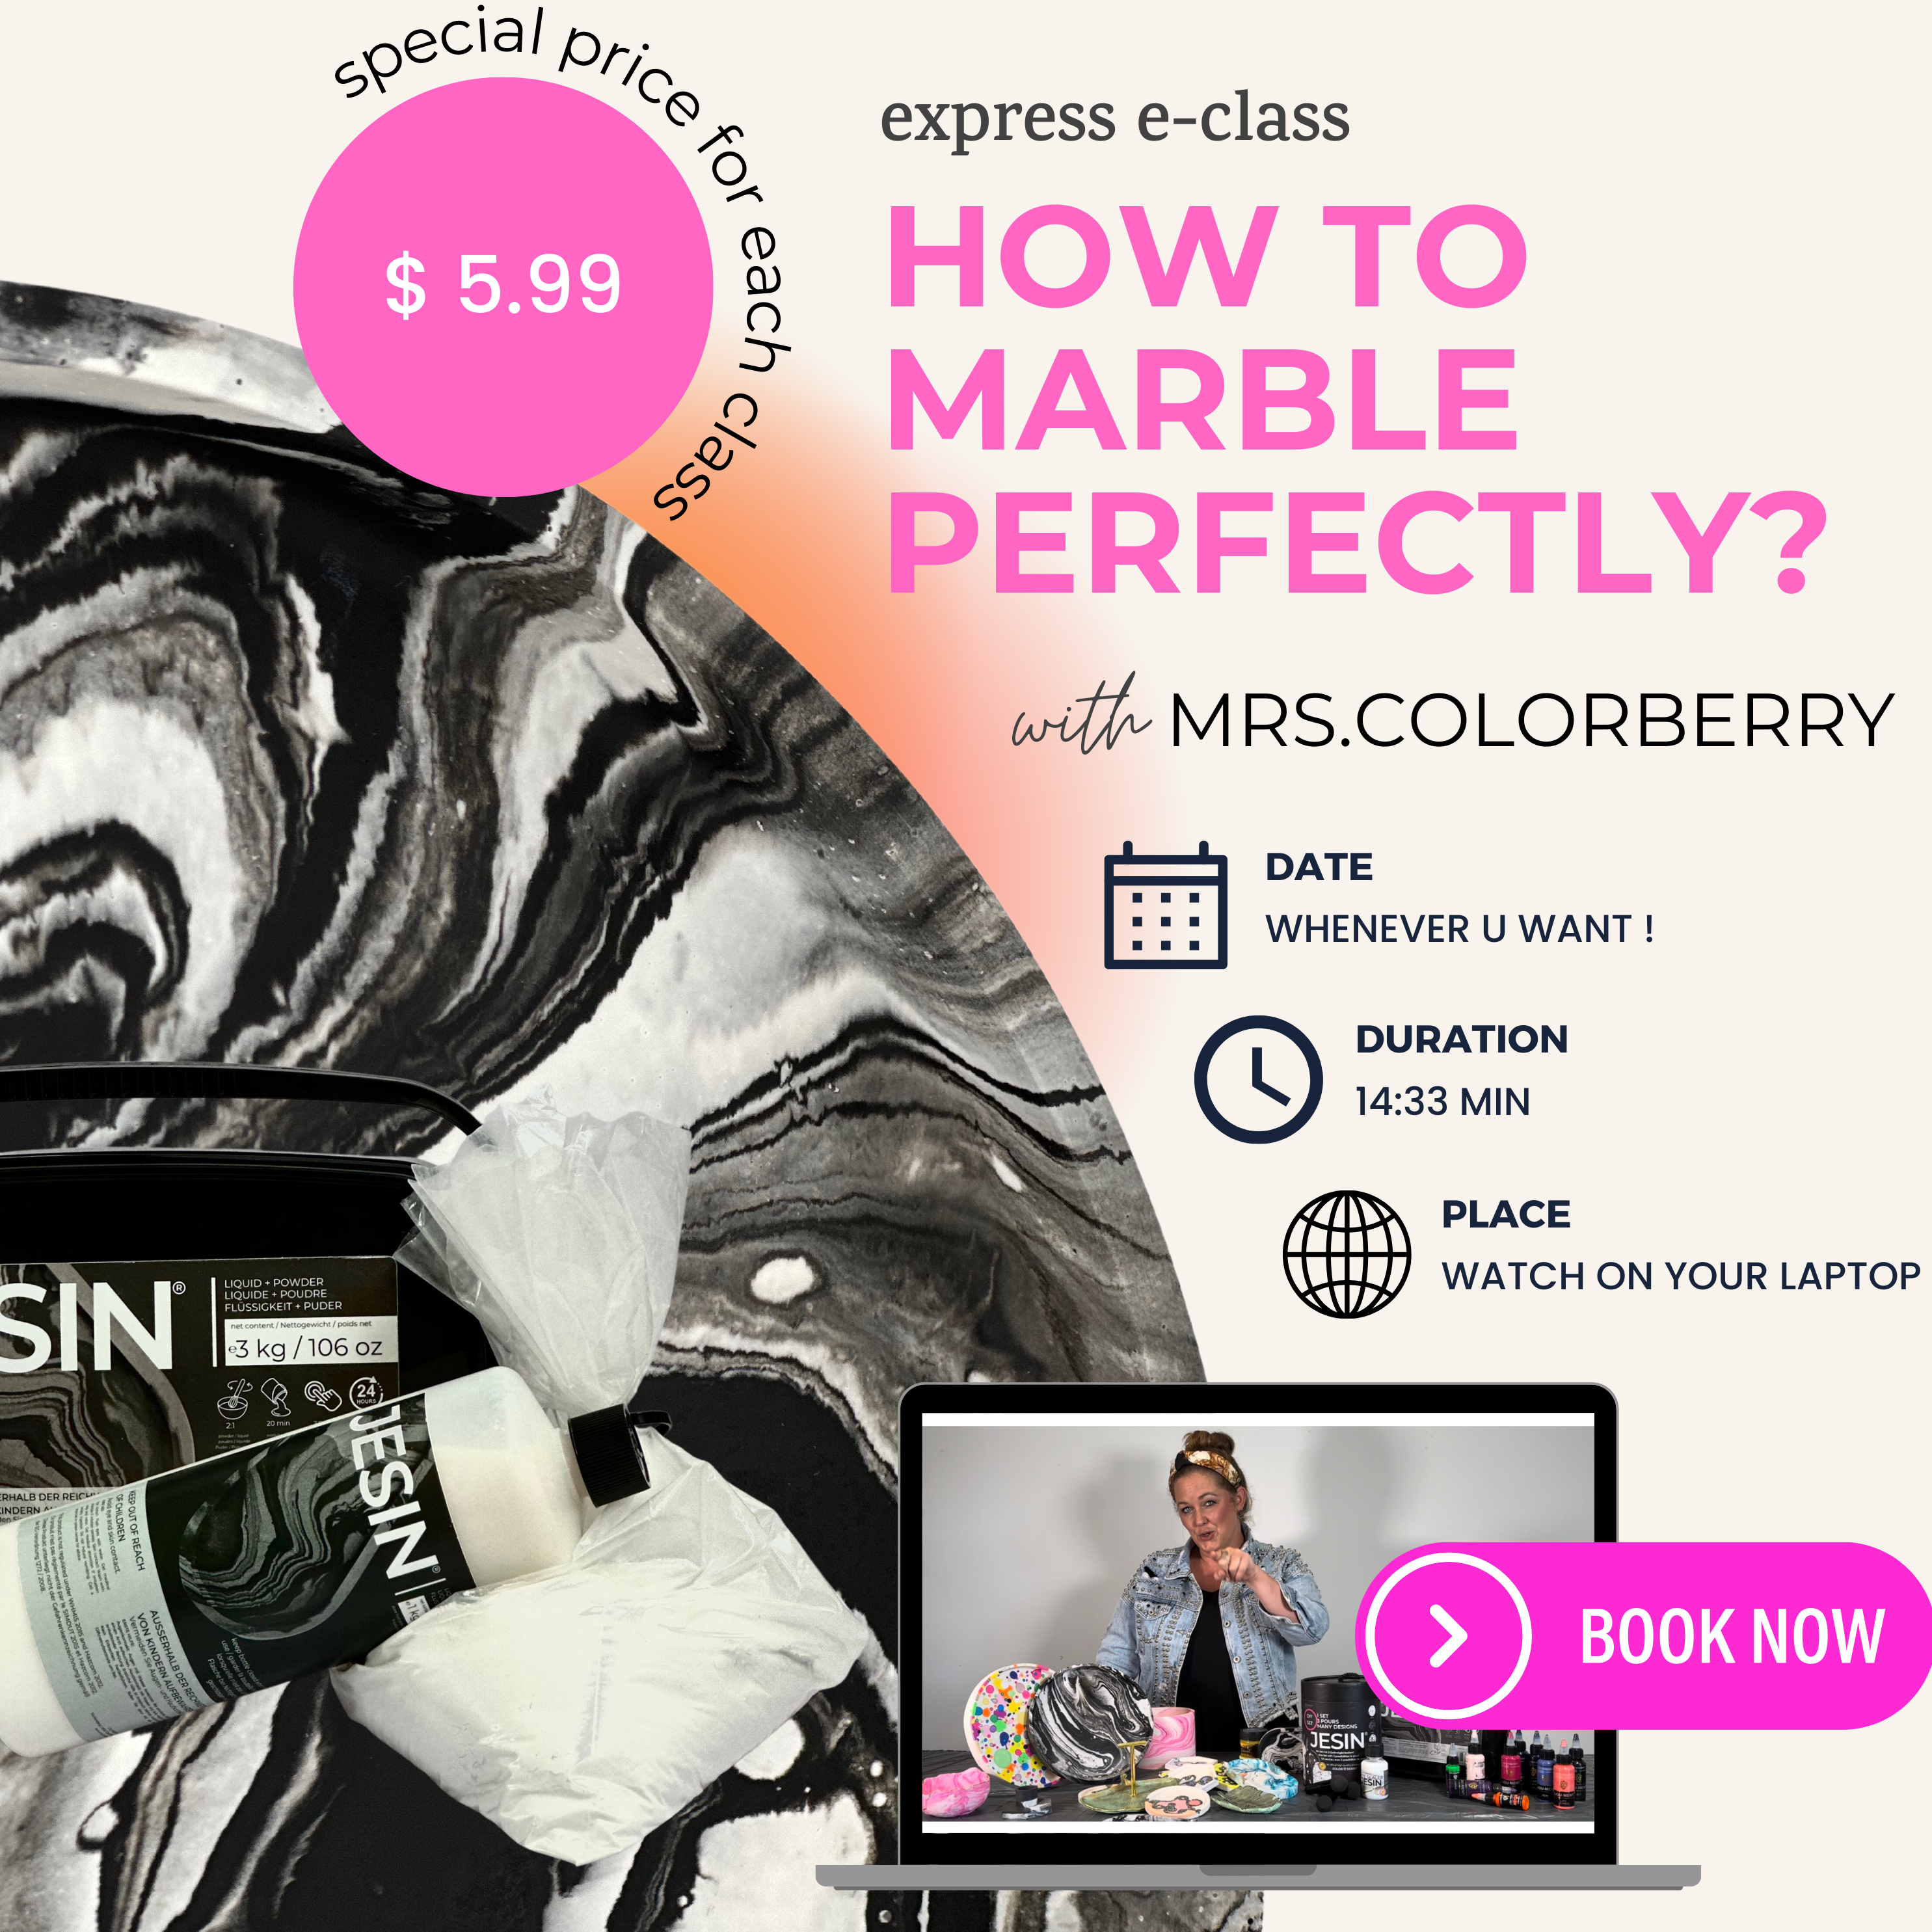 EXPRESS TICKET for PERFECT MARBLE